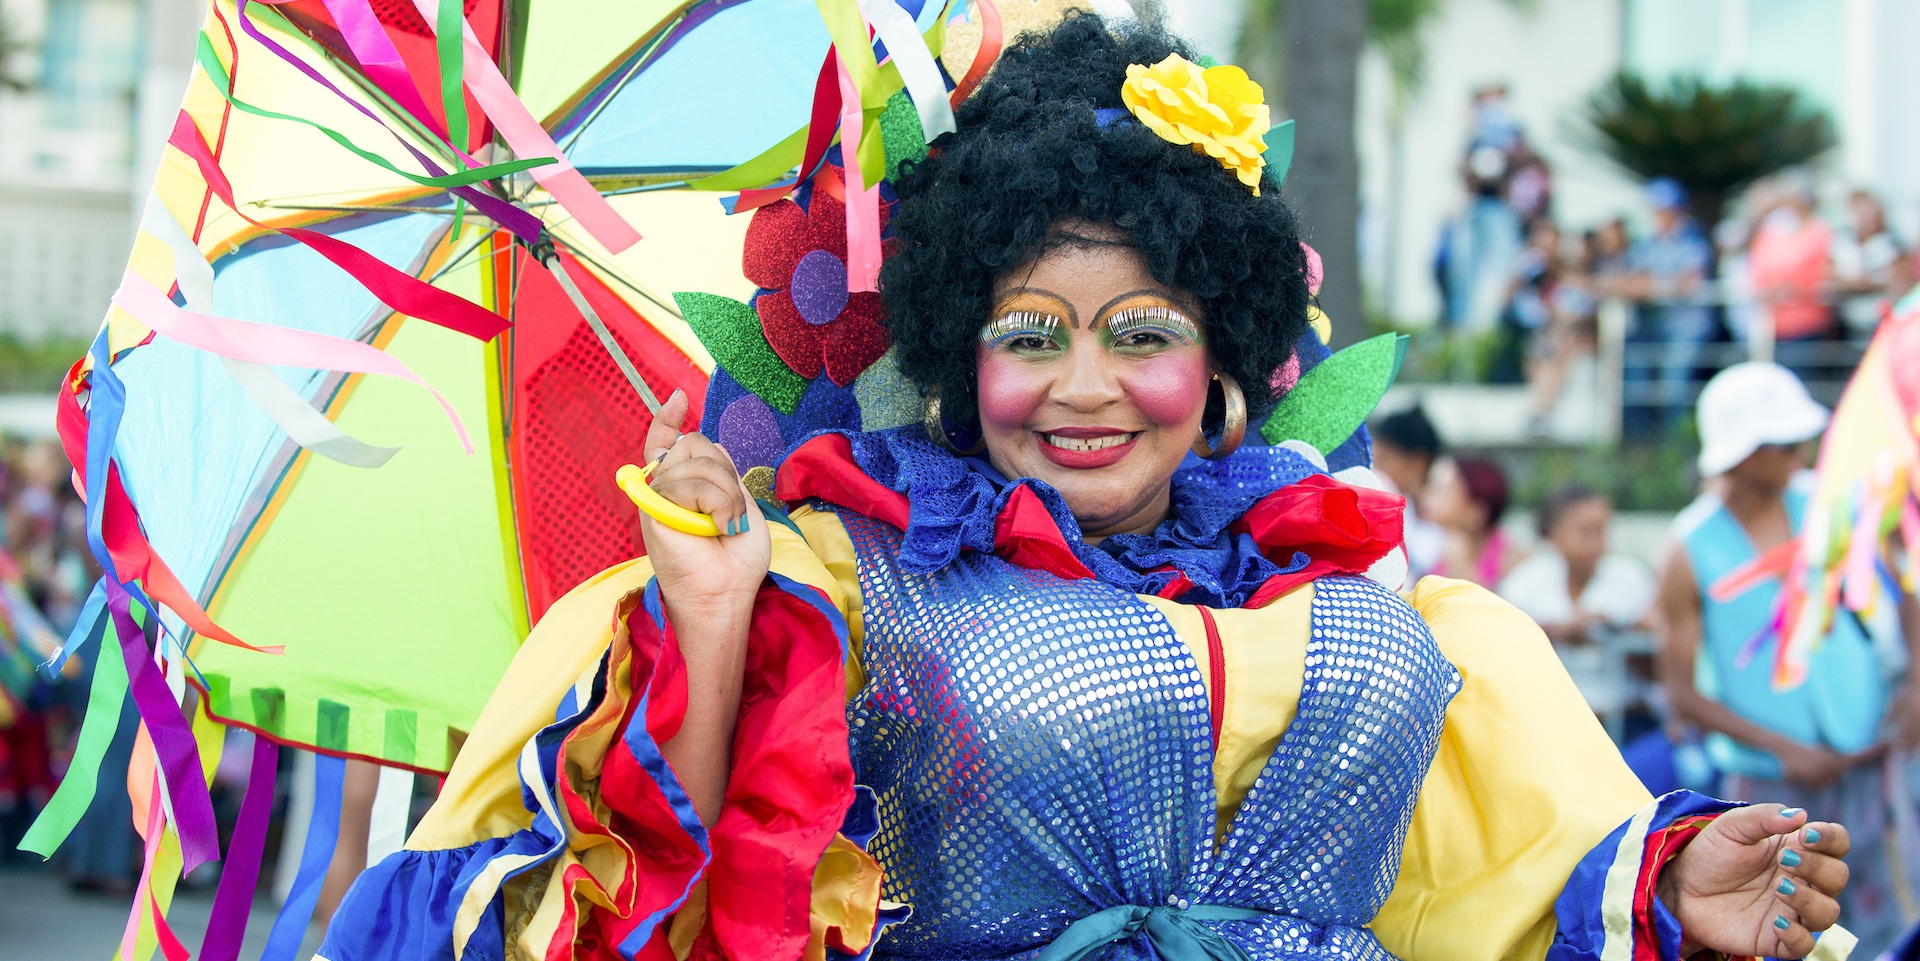 Festive Dominican Republic: Colorful Celebrations to Check Out Every Year